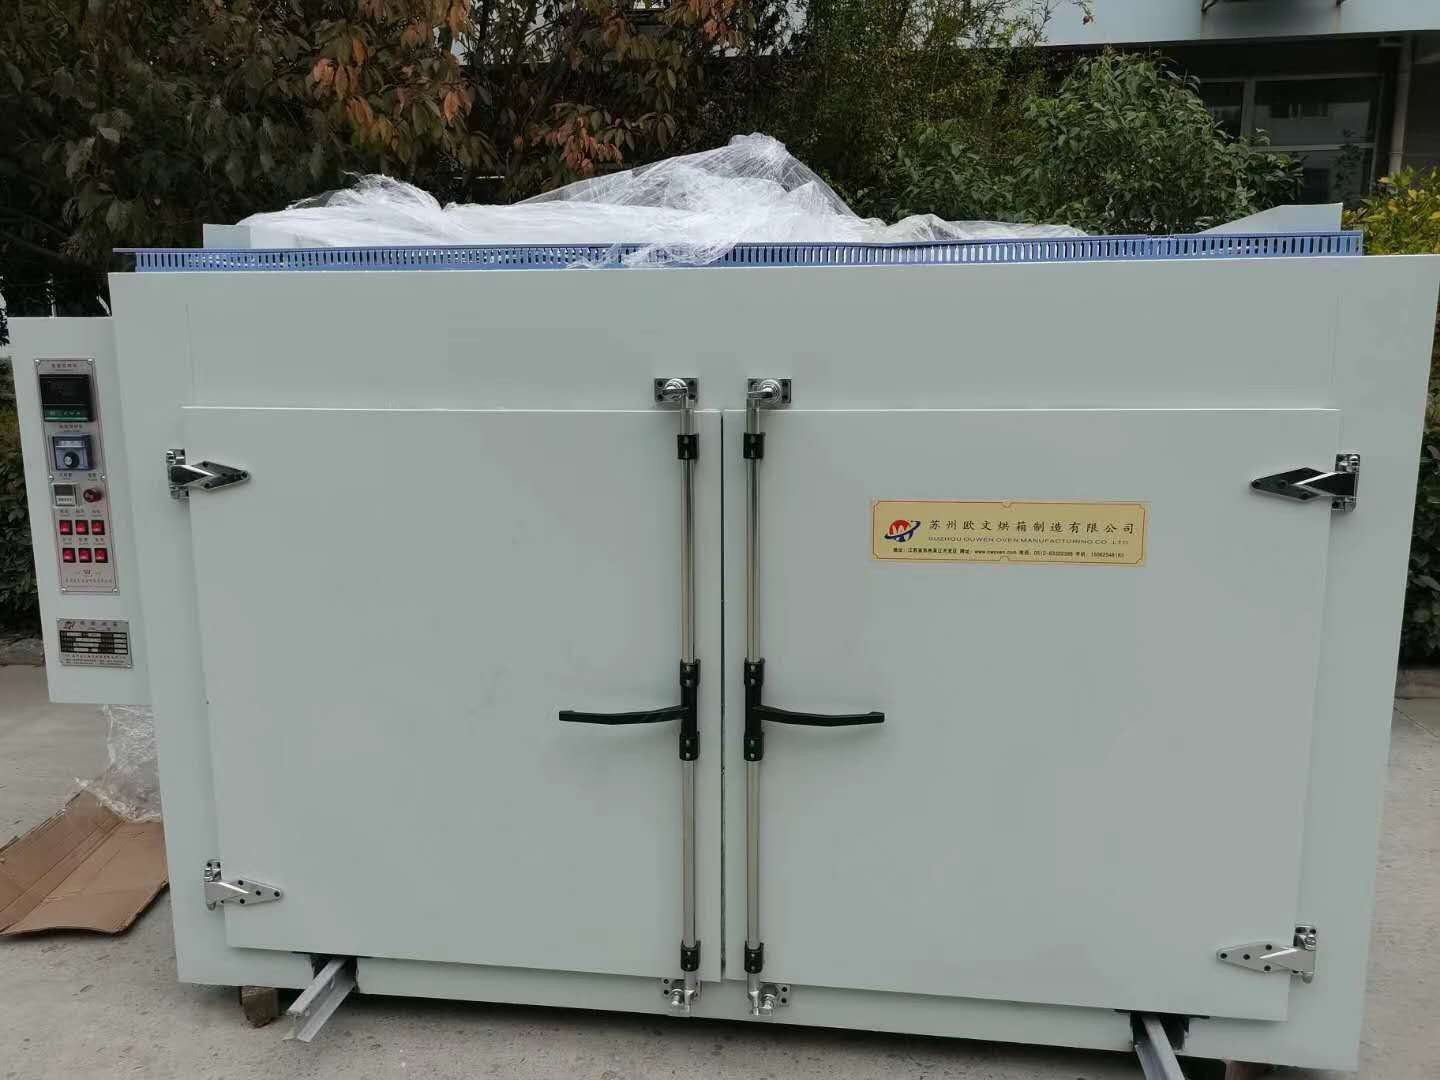 Zhimin purchased large size oven for big capacity load cells